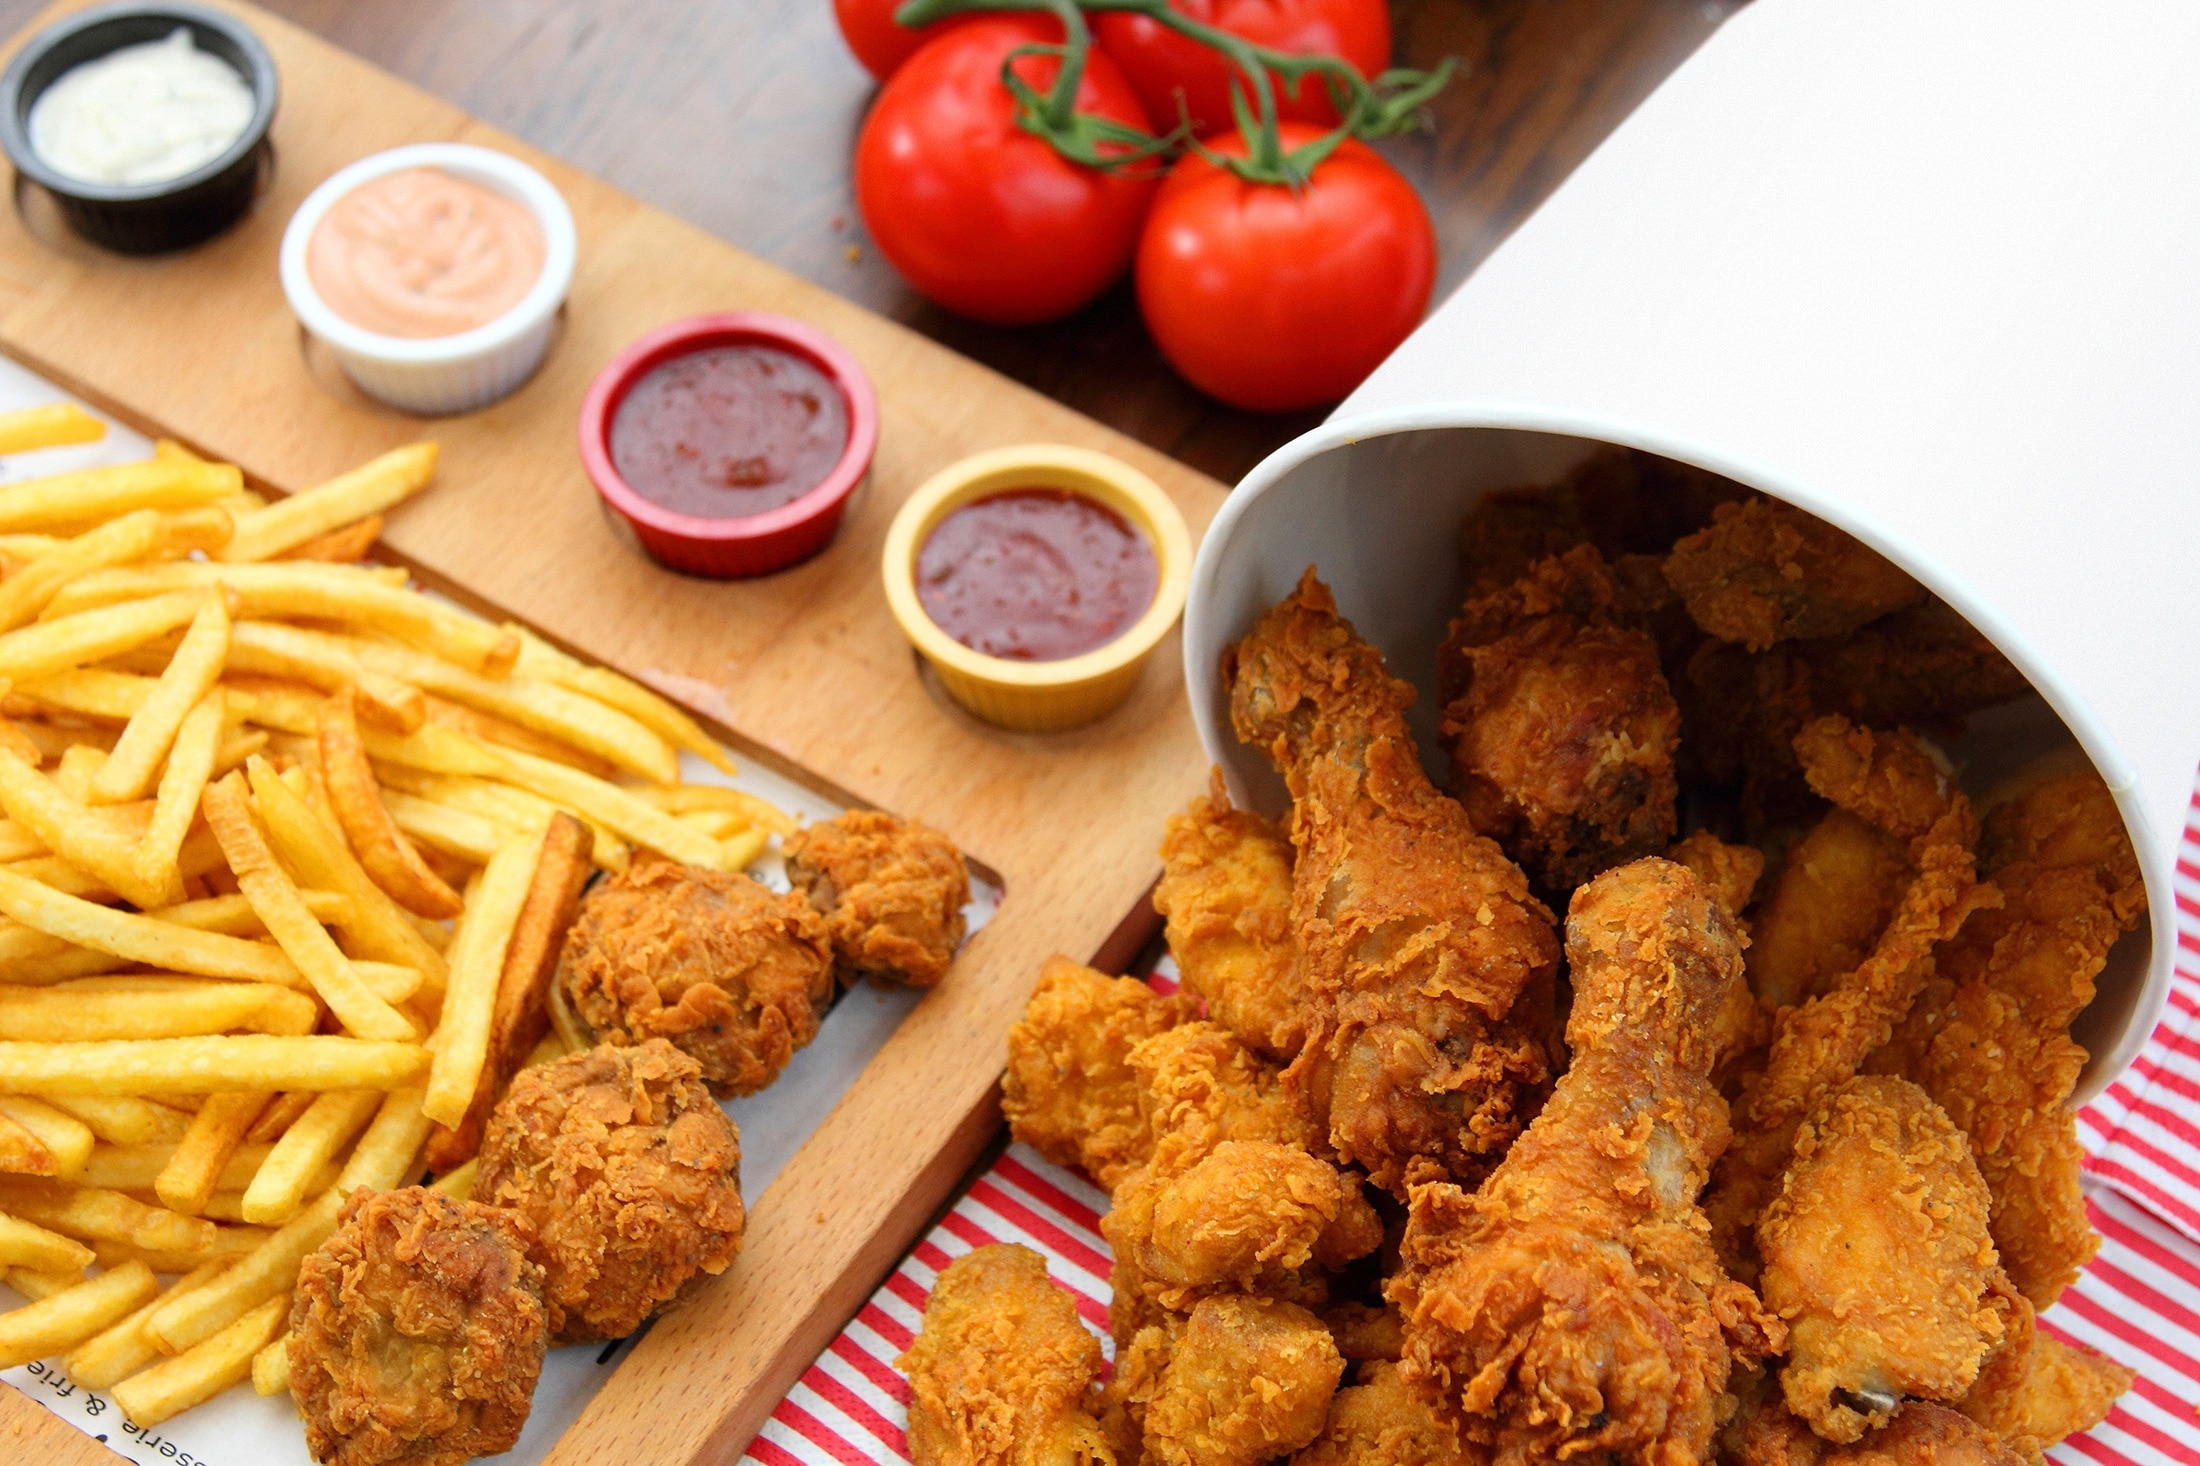 A bucket of fried chicken, served with french fries, ketchup, mayo, and Thousand Island dressing